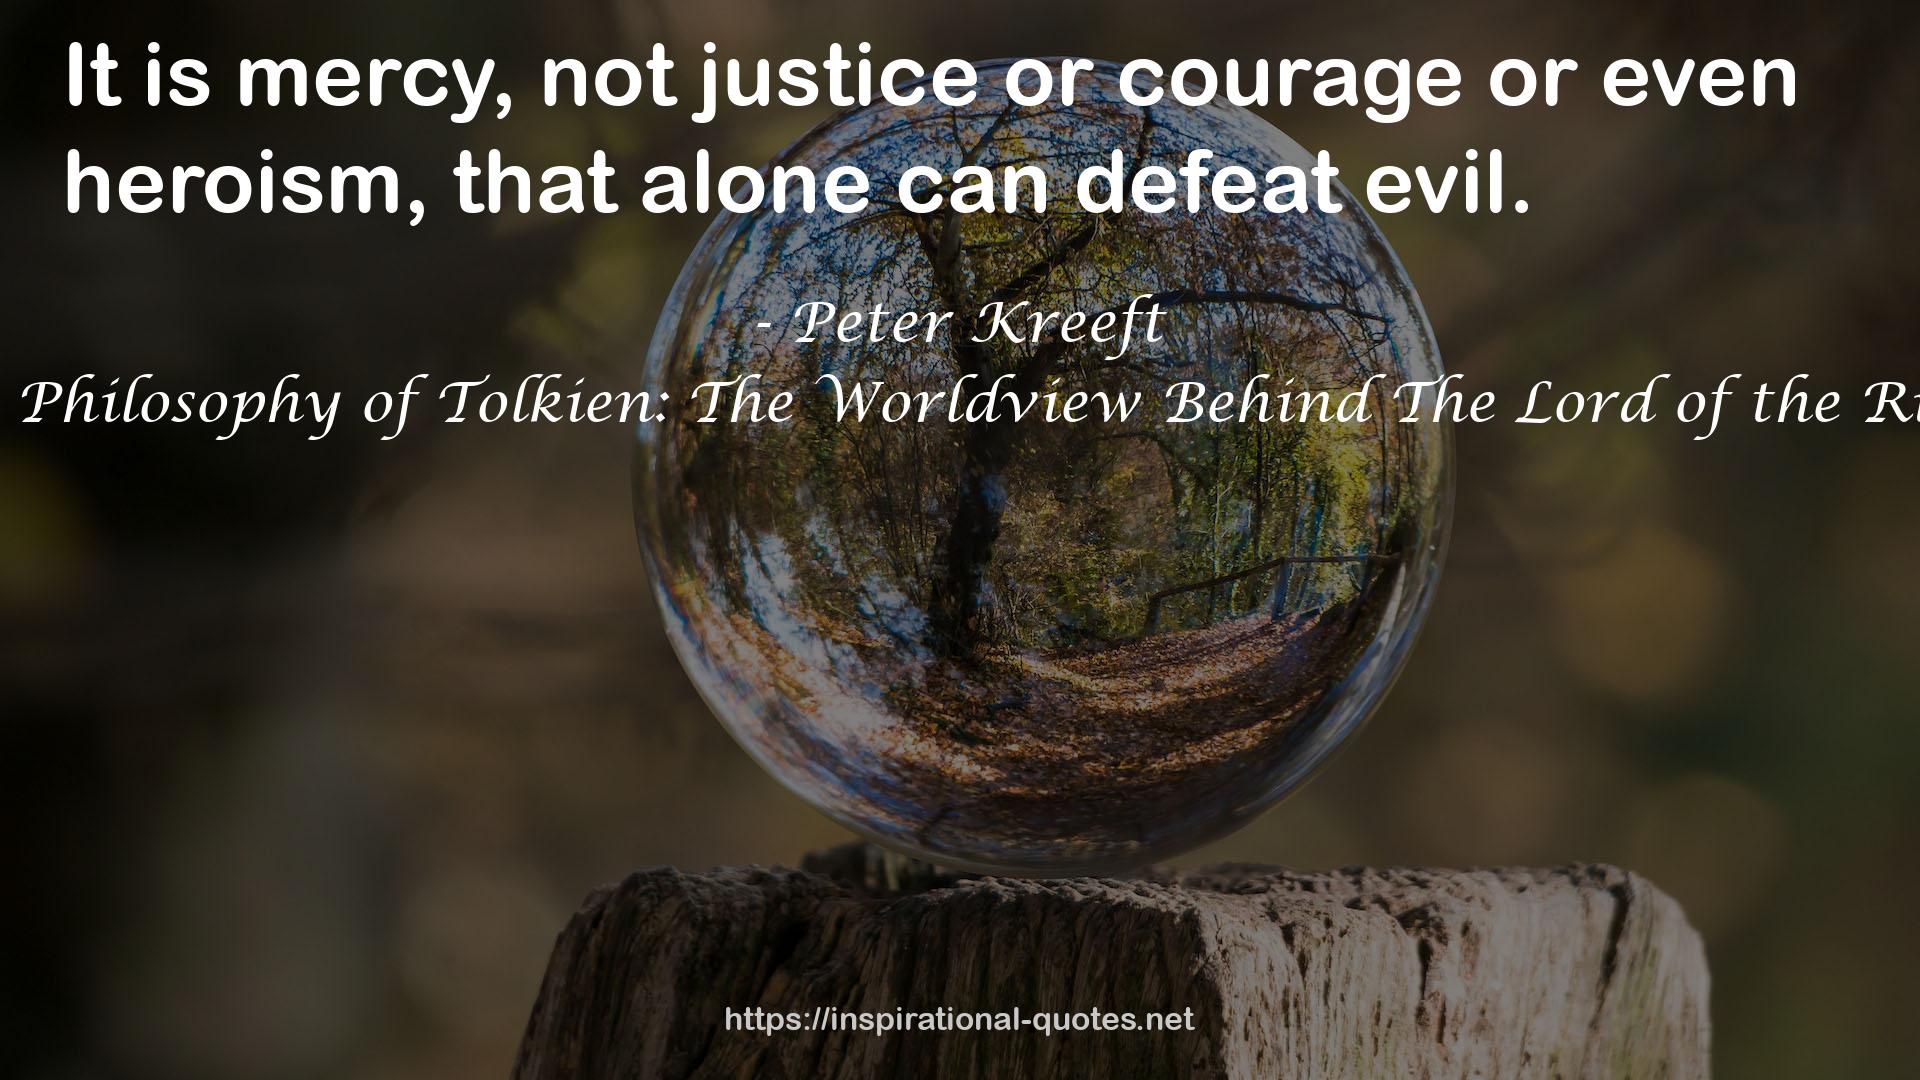 The Philosophy of Tolkien: The Worldview Behind The Lord of the Rings QUOTES